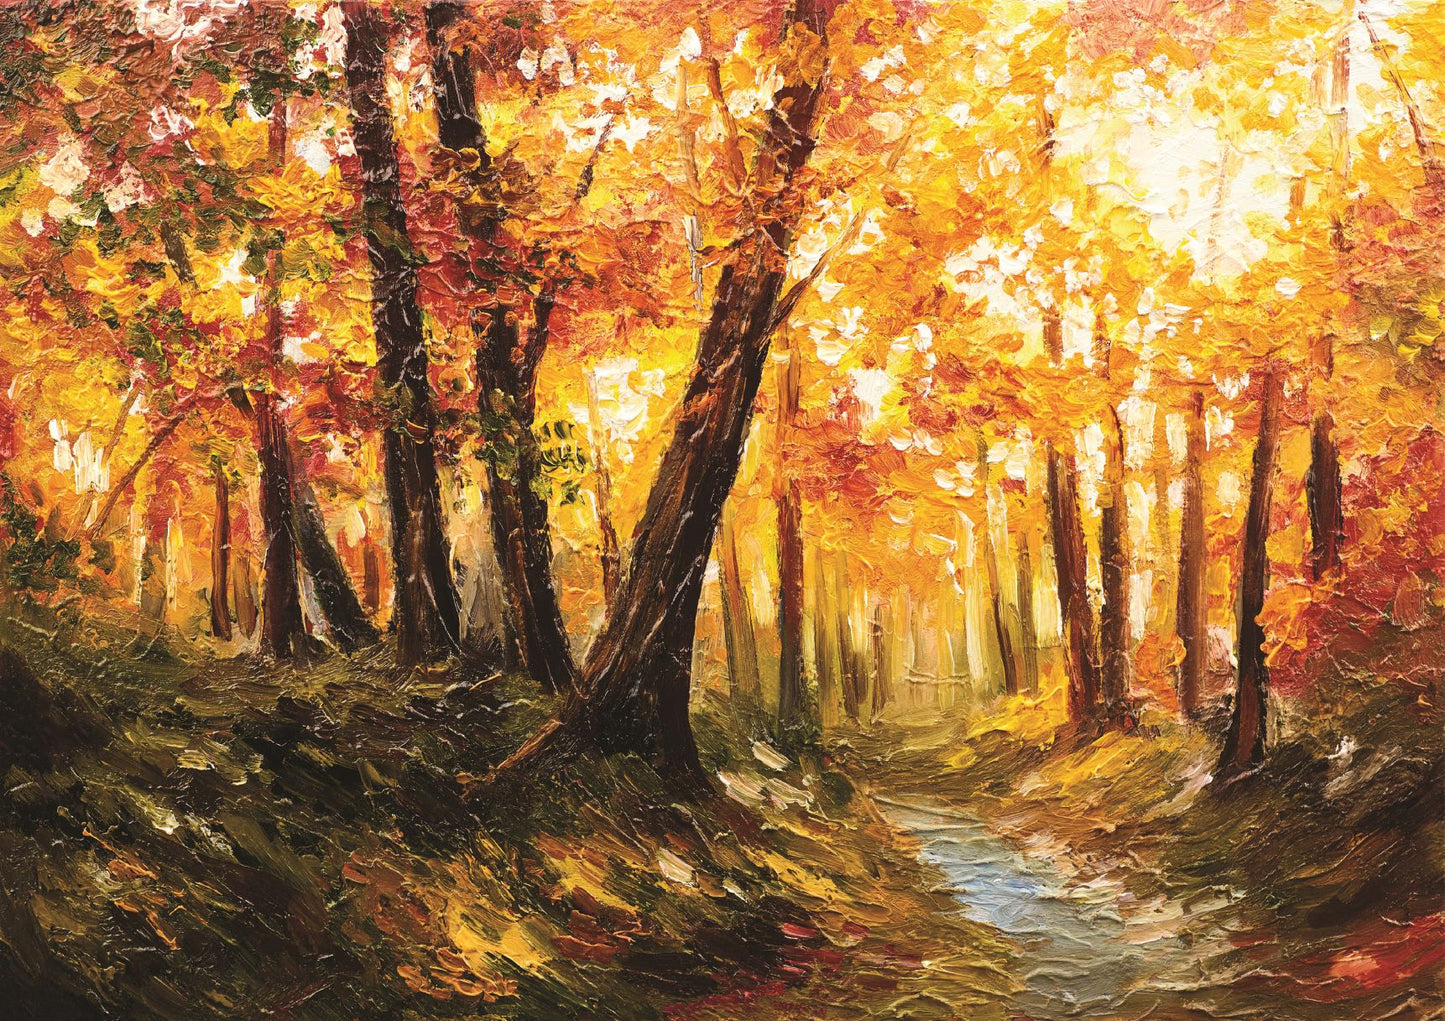 Autumn forest near the river, orange leaves